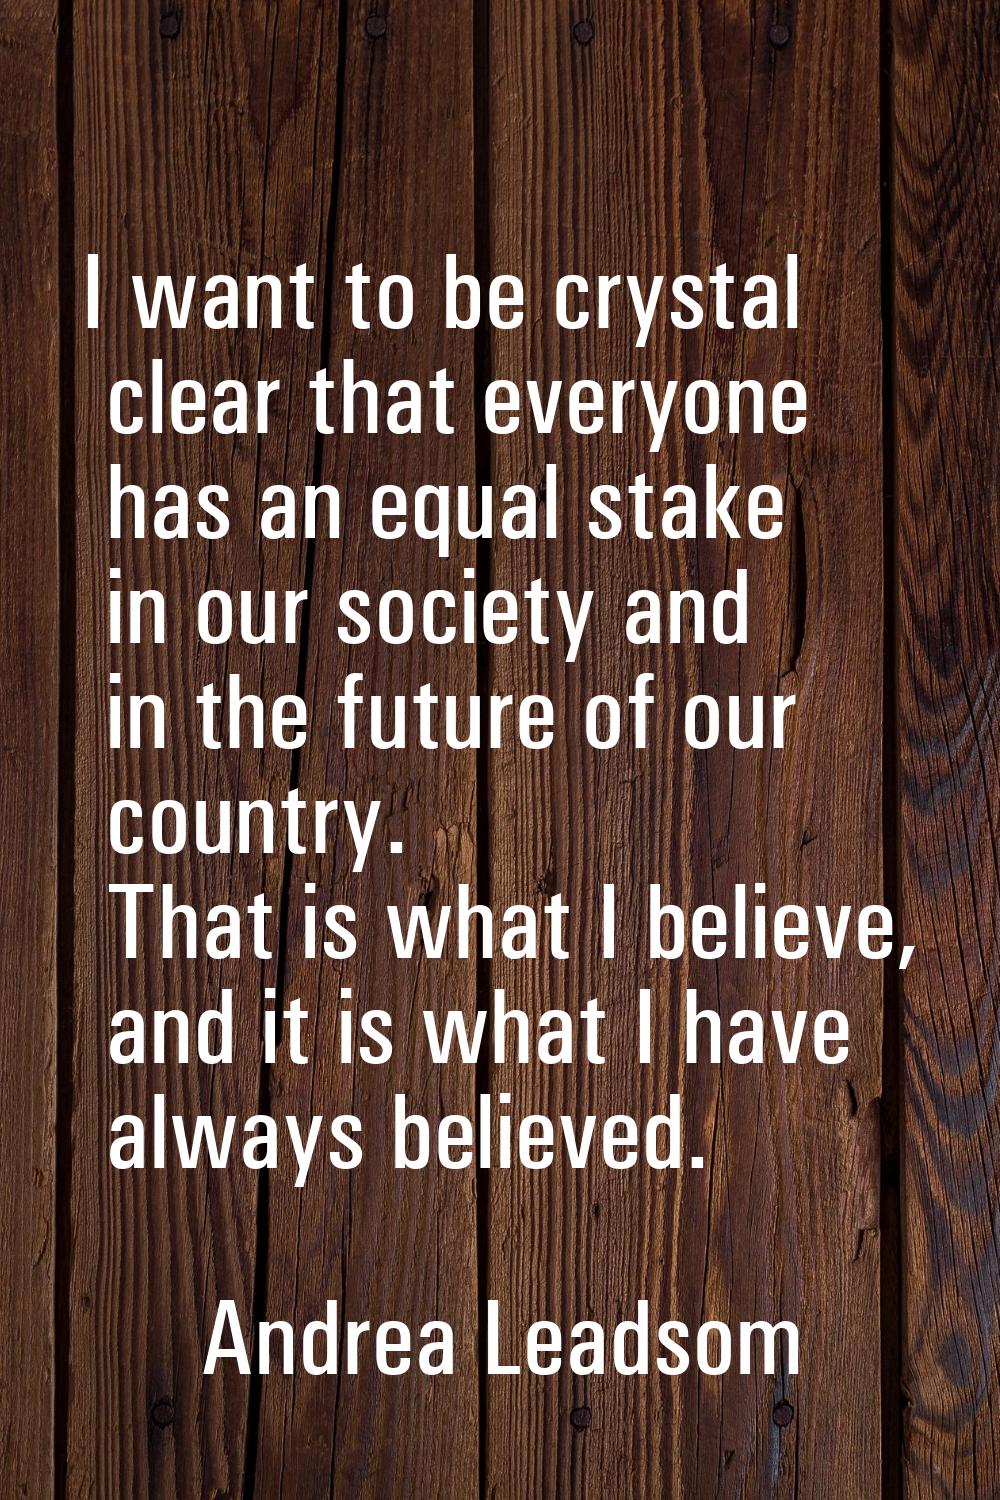 I want to be crystal clear that everyone has an equal stake in our society and in the future of our